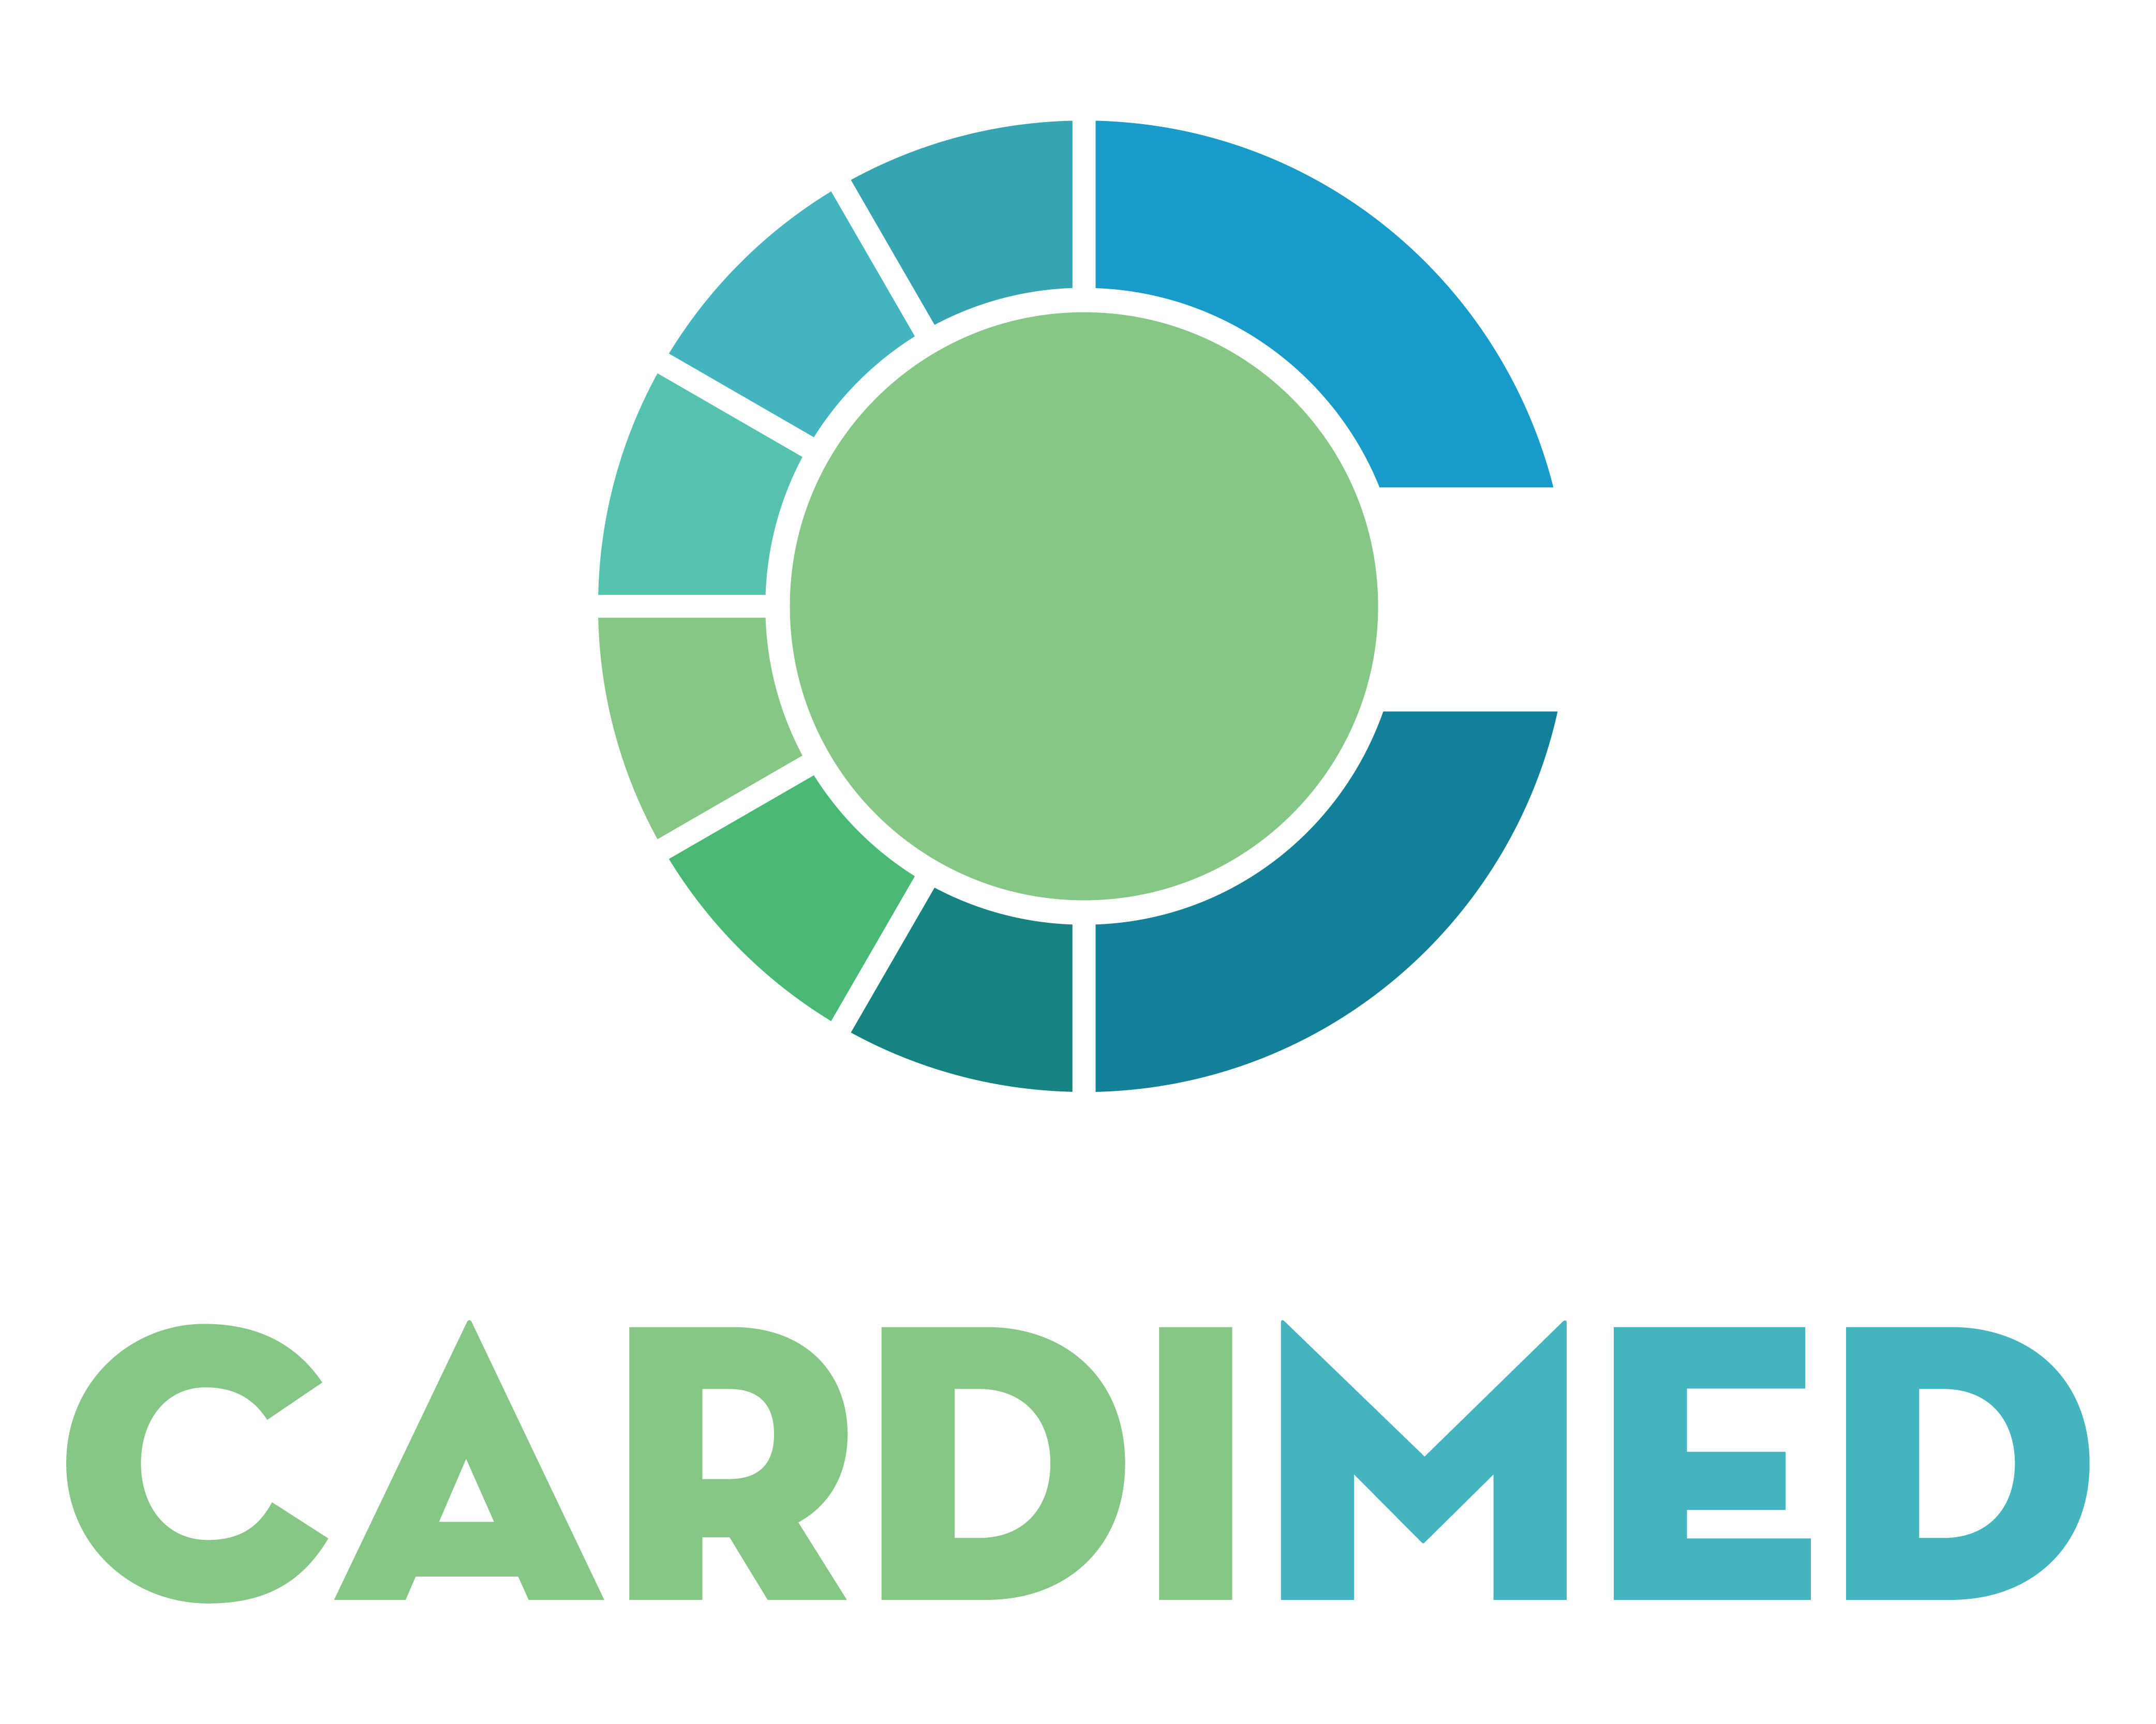 Logo of the CARDIMED project "